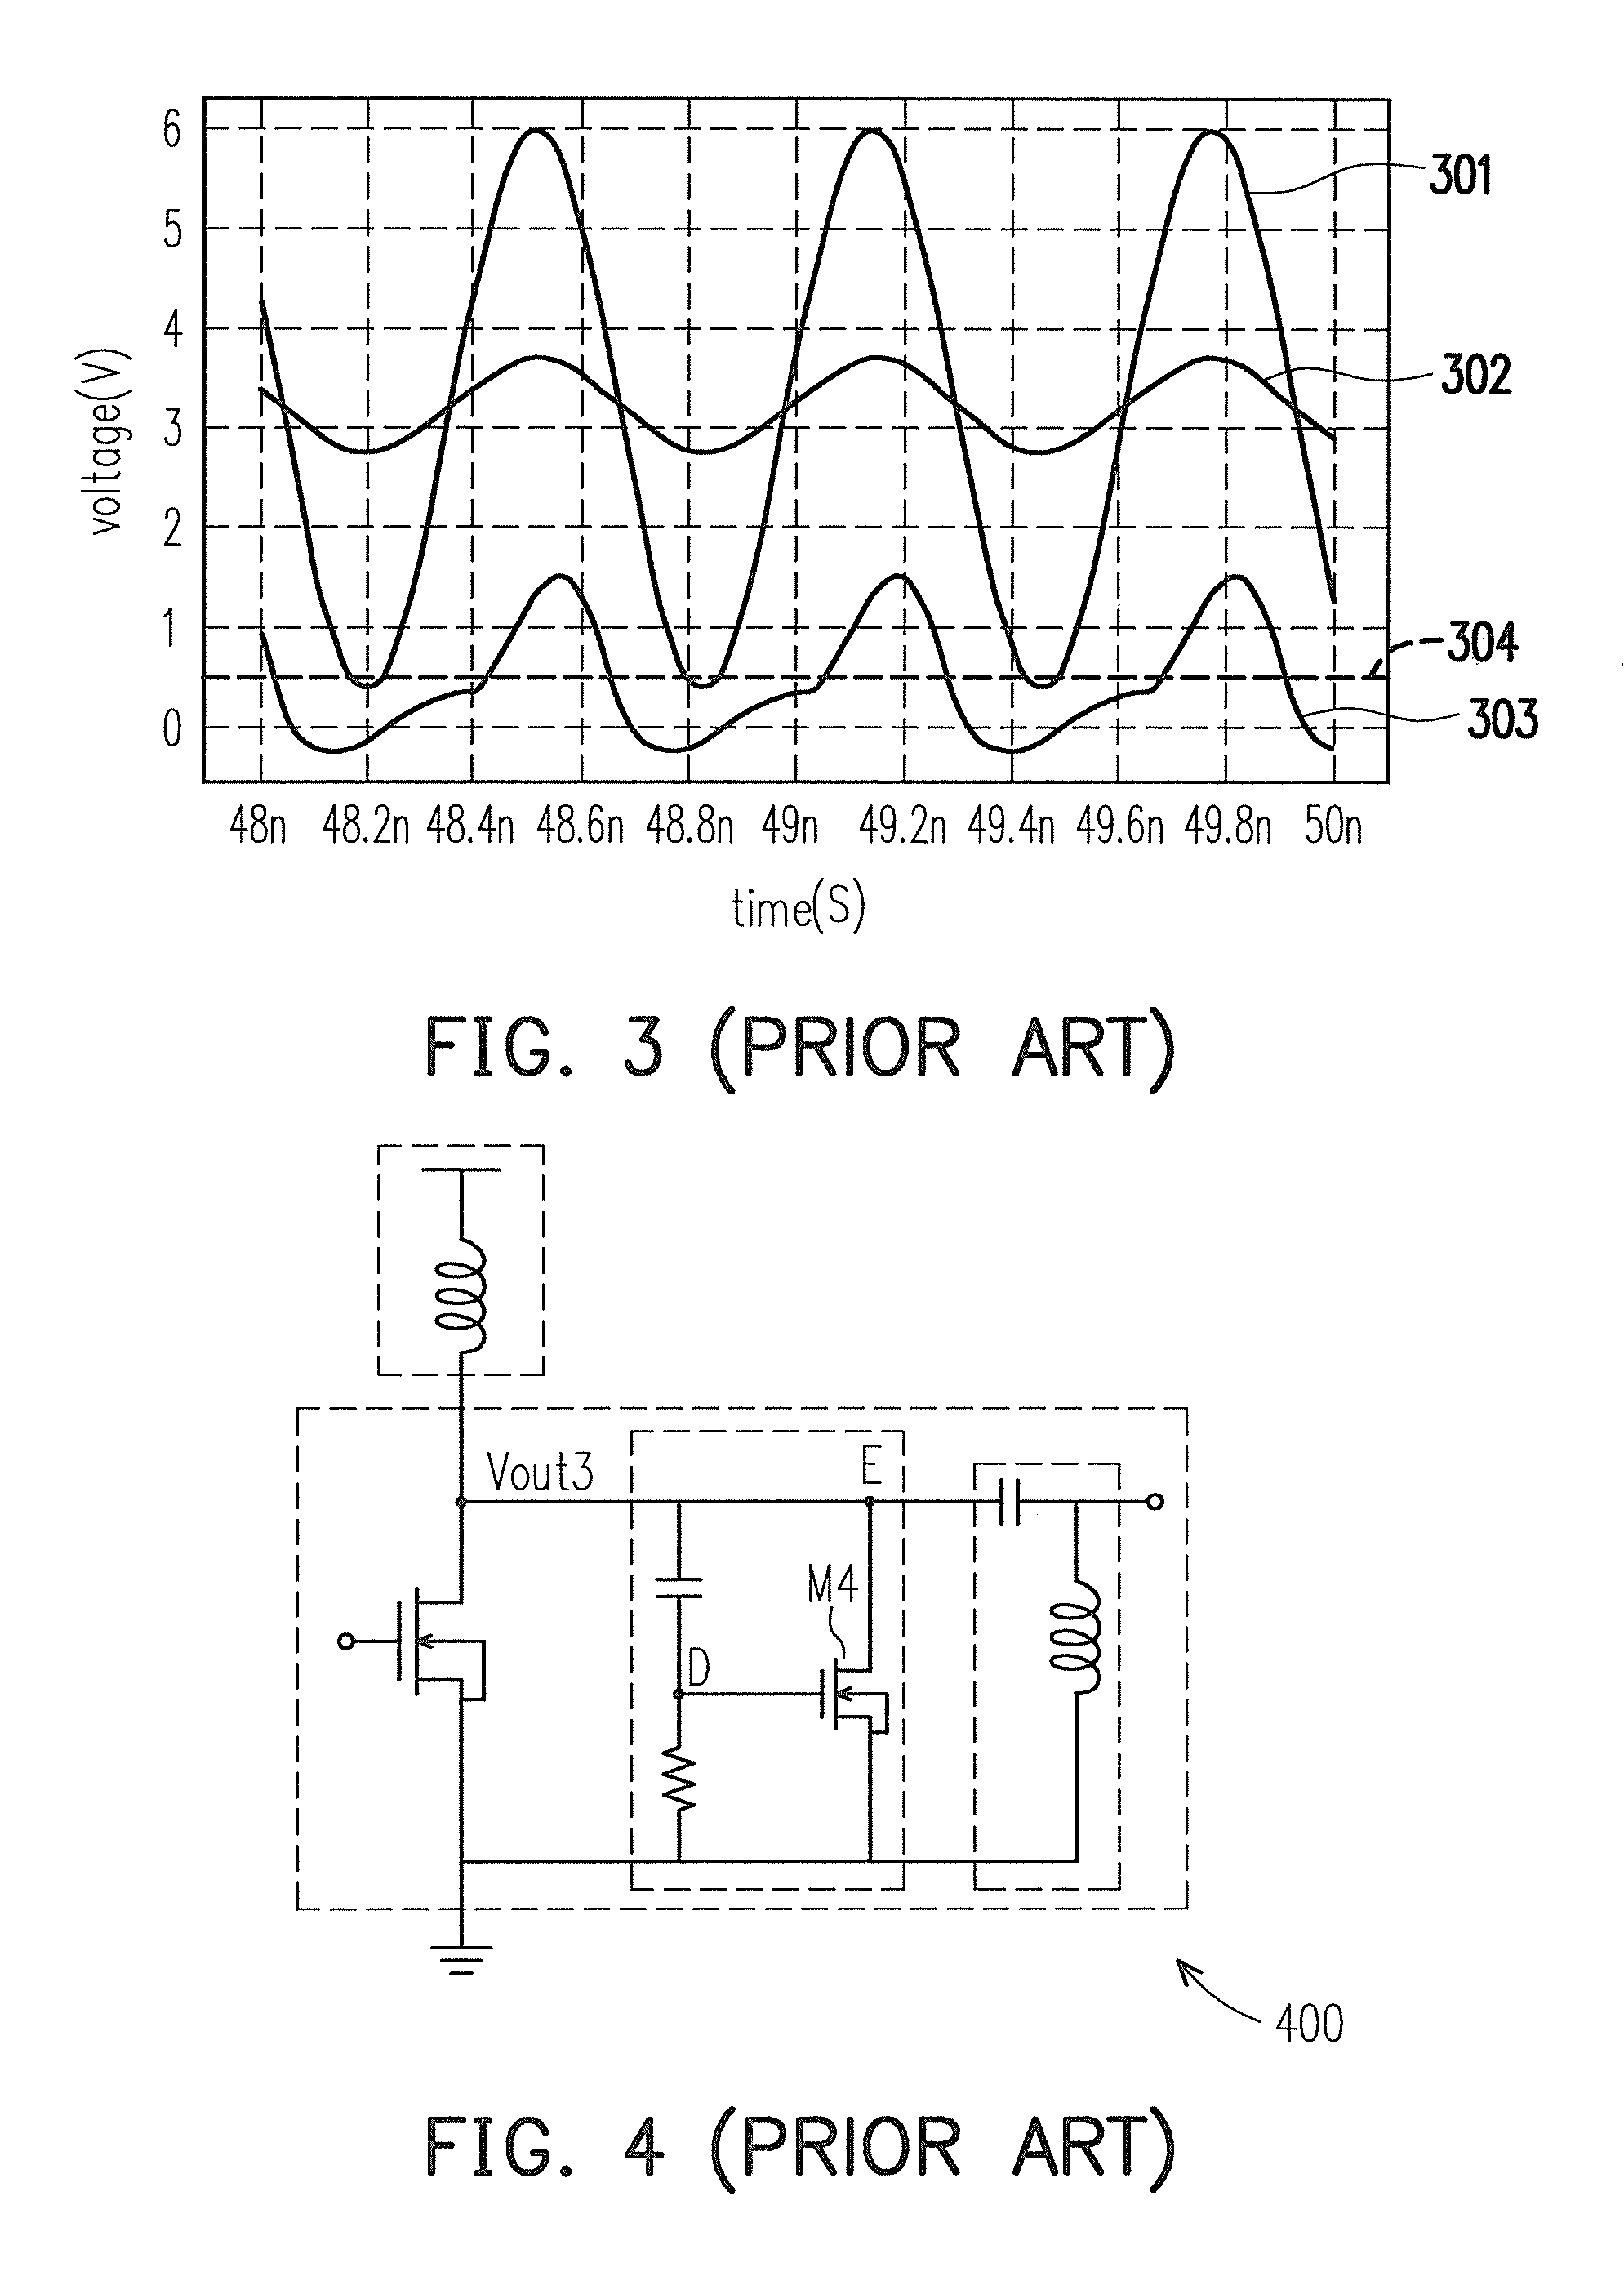 ESD clamp circuit applied to power amplifier